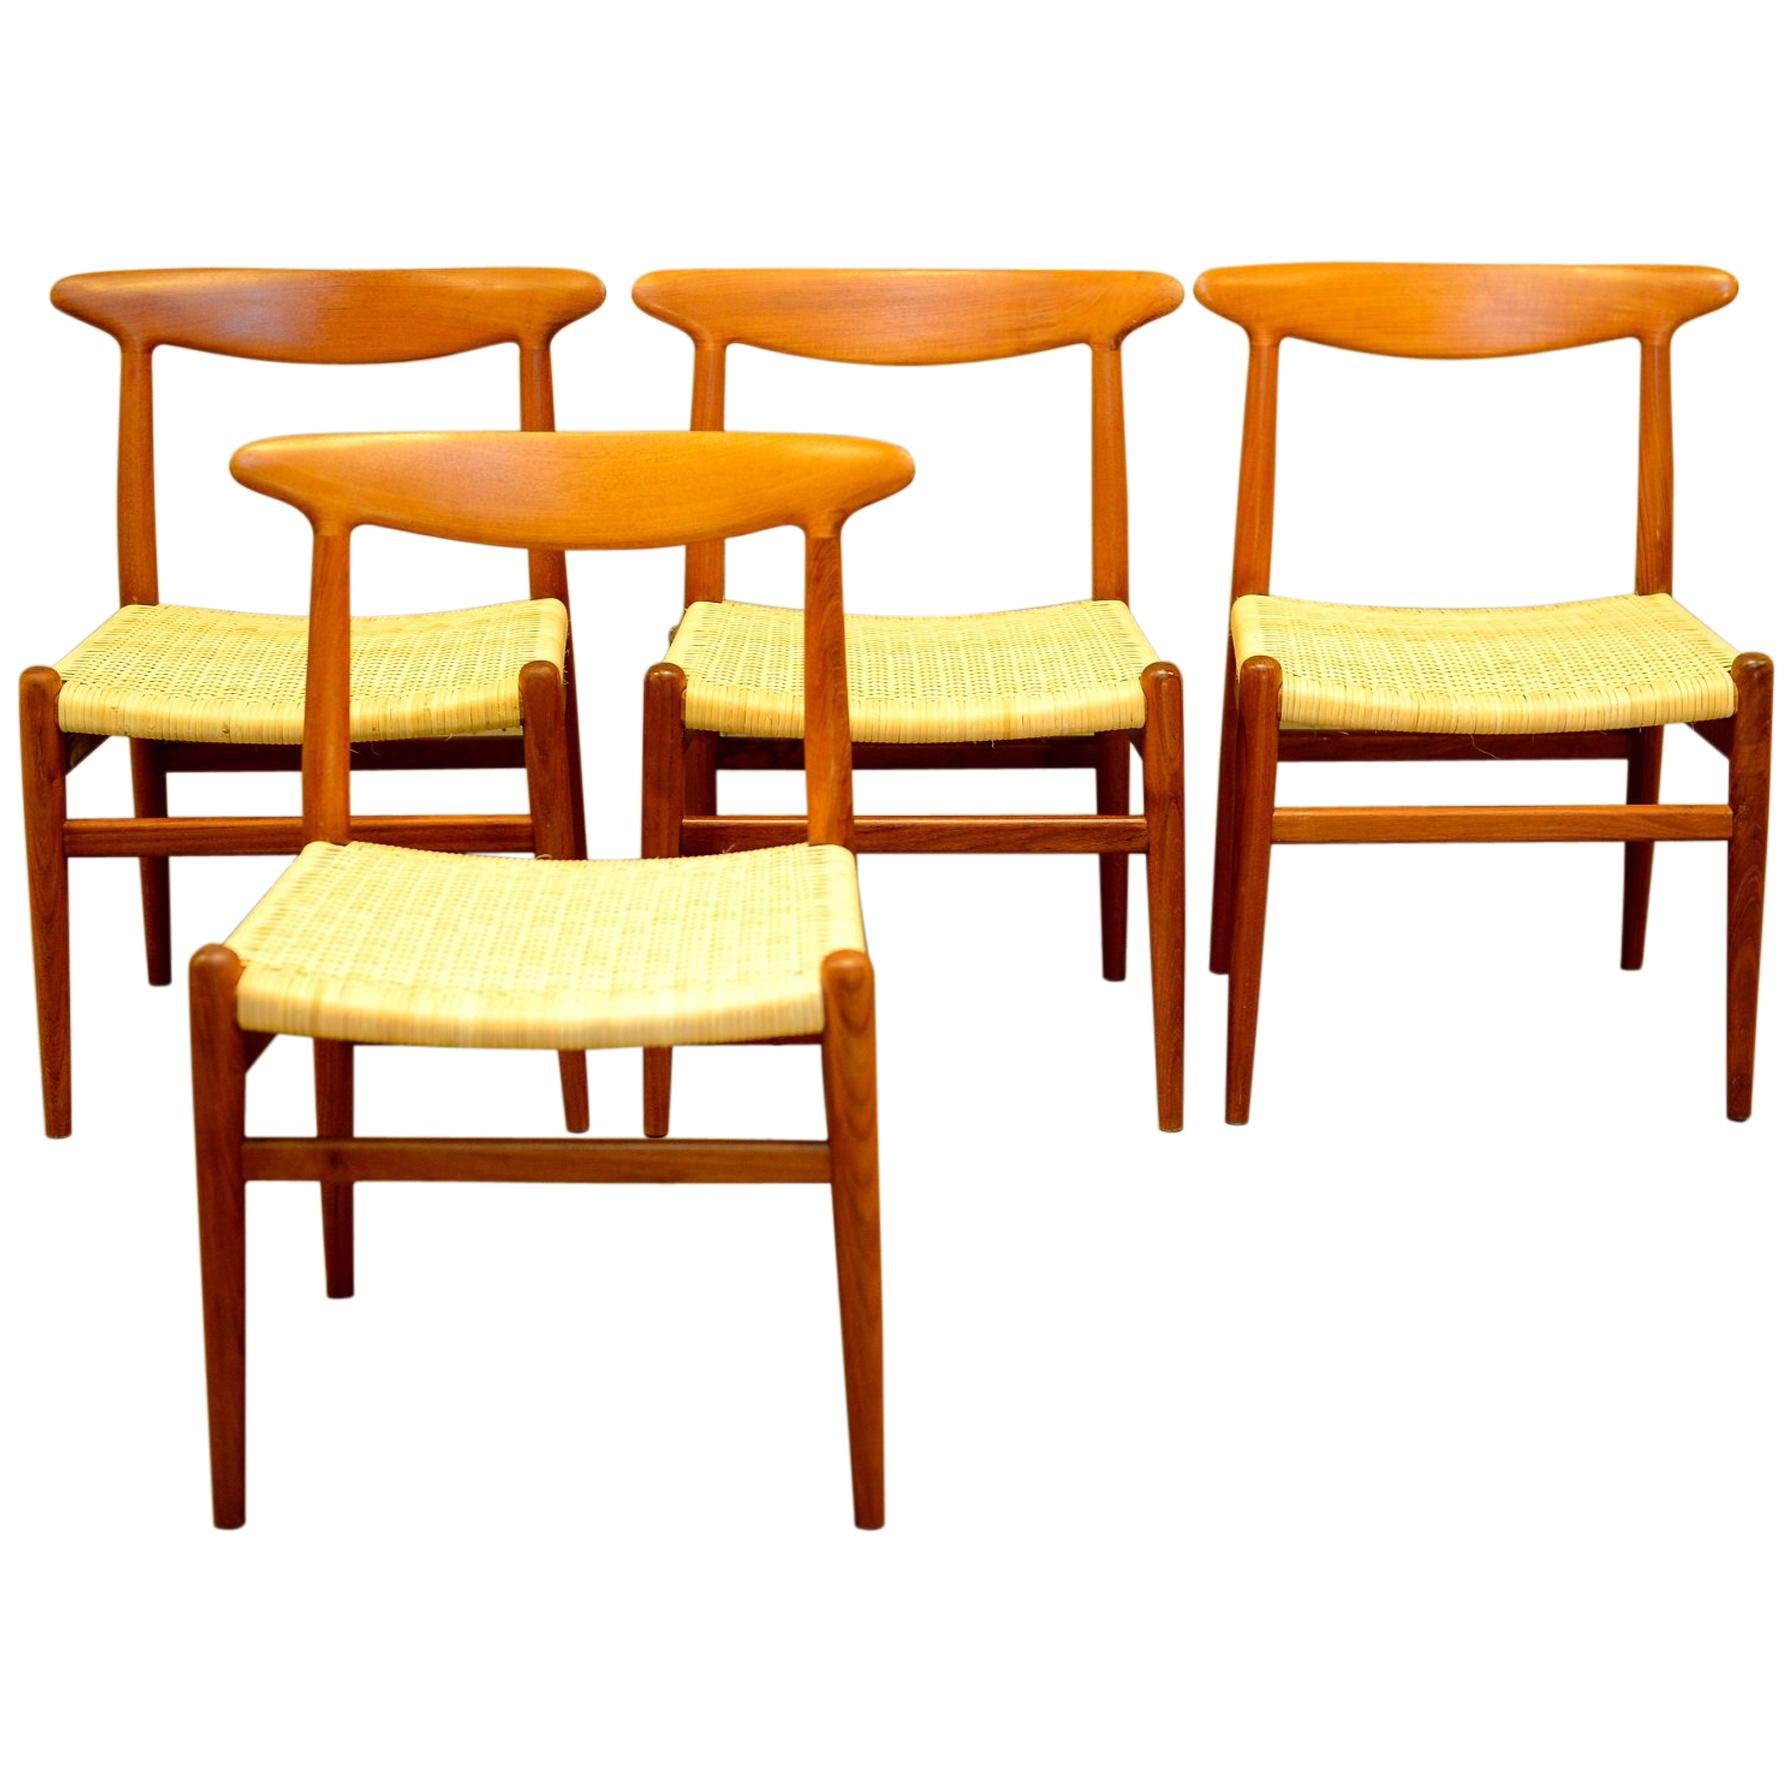 Set of 4 W2 Teak and Cane Chairs by Hans J. Wegner, 1950s, C.M. Madsens DK For Sale